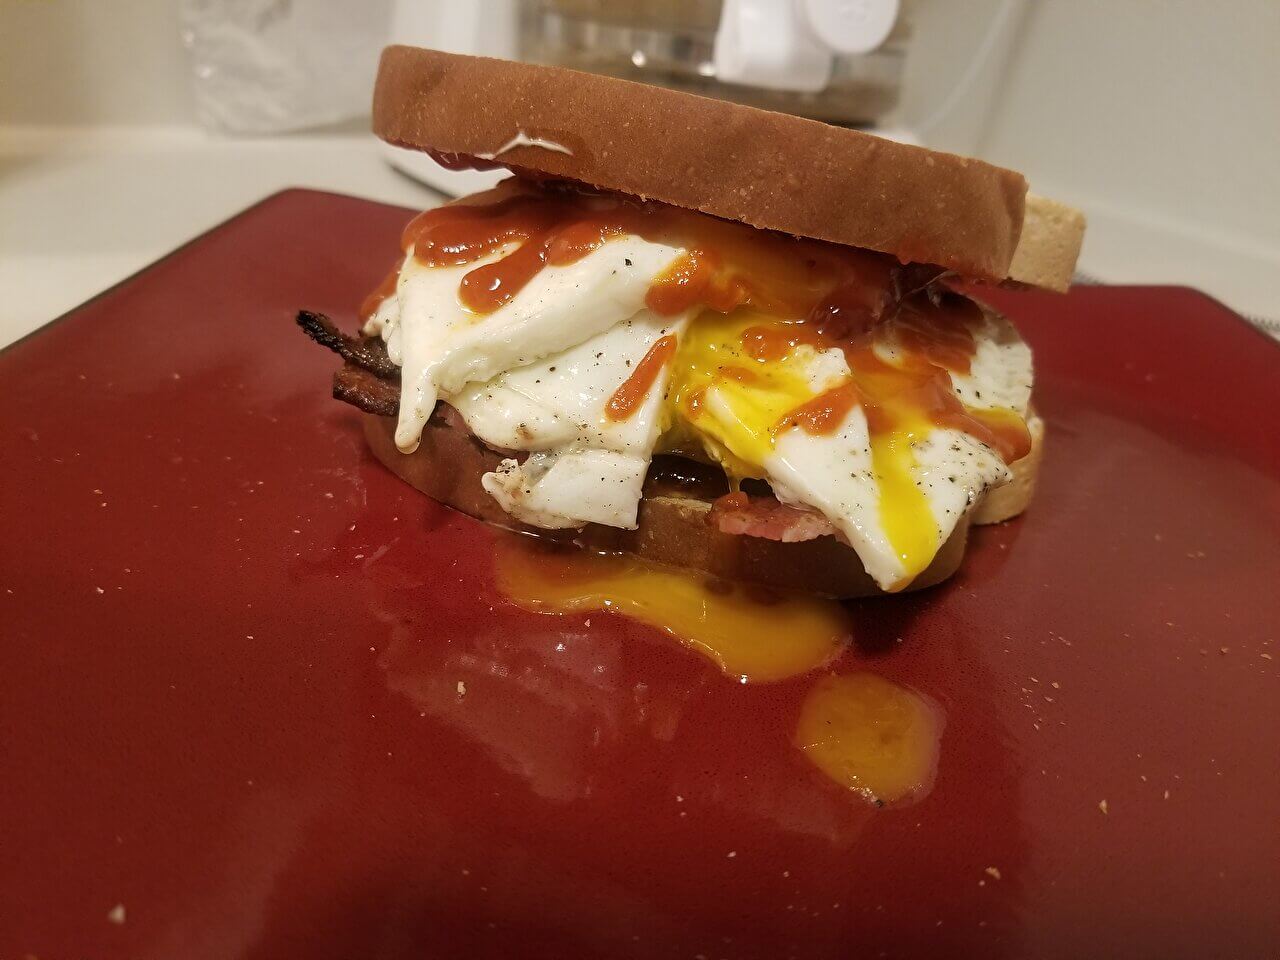 Egg and bacon sandwich with strawberry preserves and sriracha